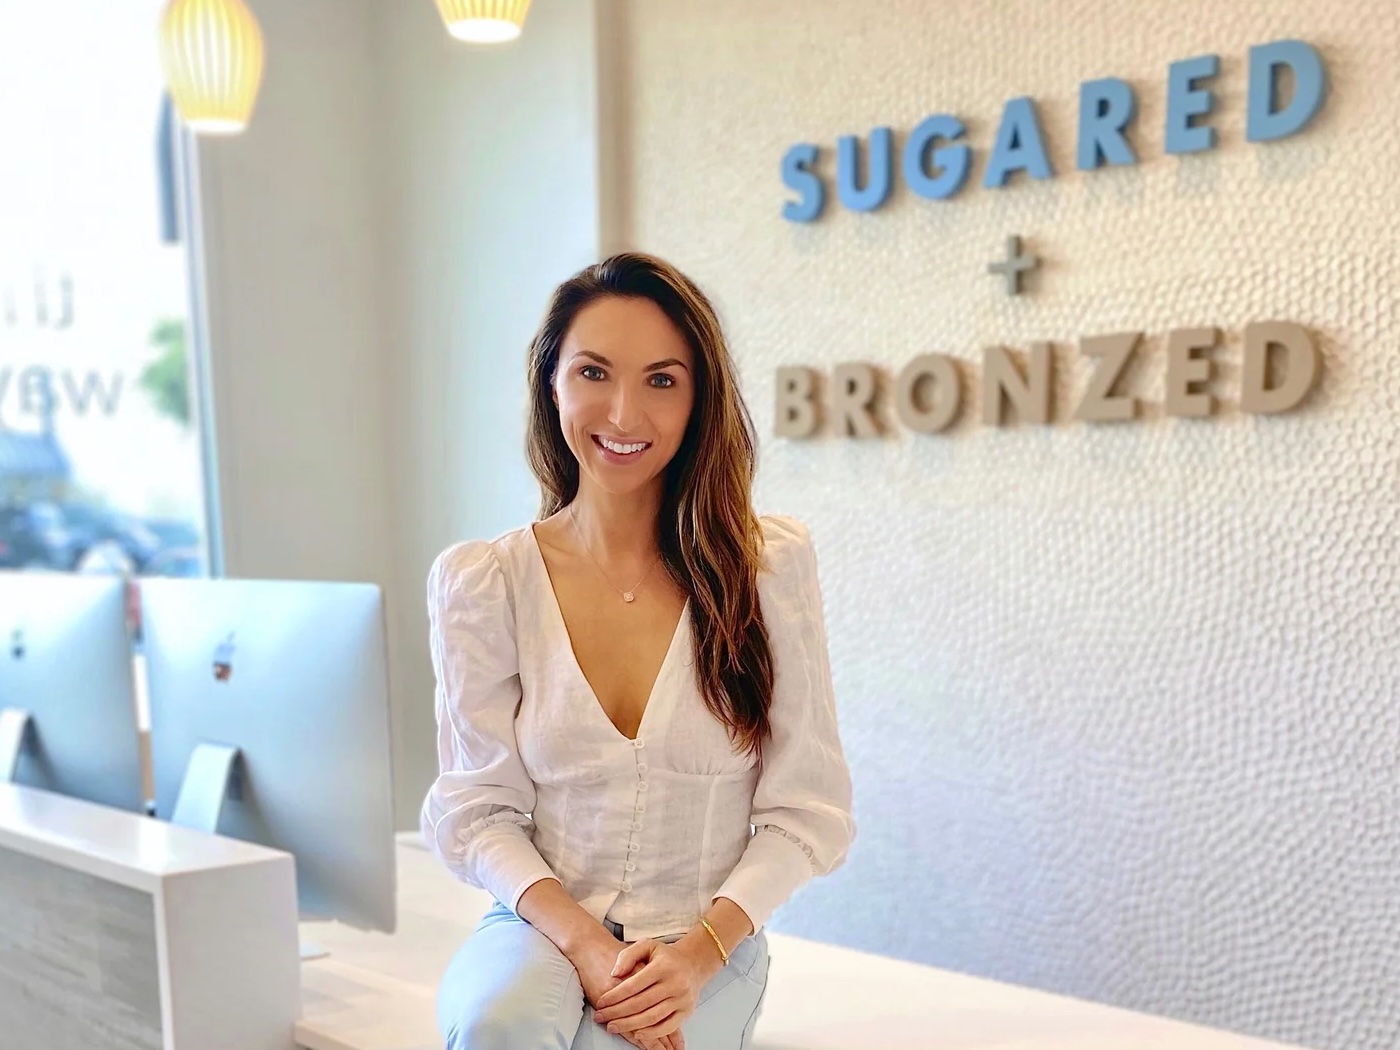 Woman wearing jeans and a white blouse sits on front desk of salon reception area, with Sugared + Bronzed logo on wall behind her.